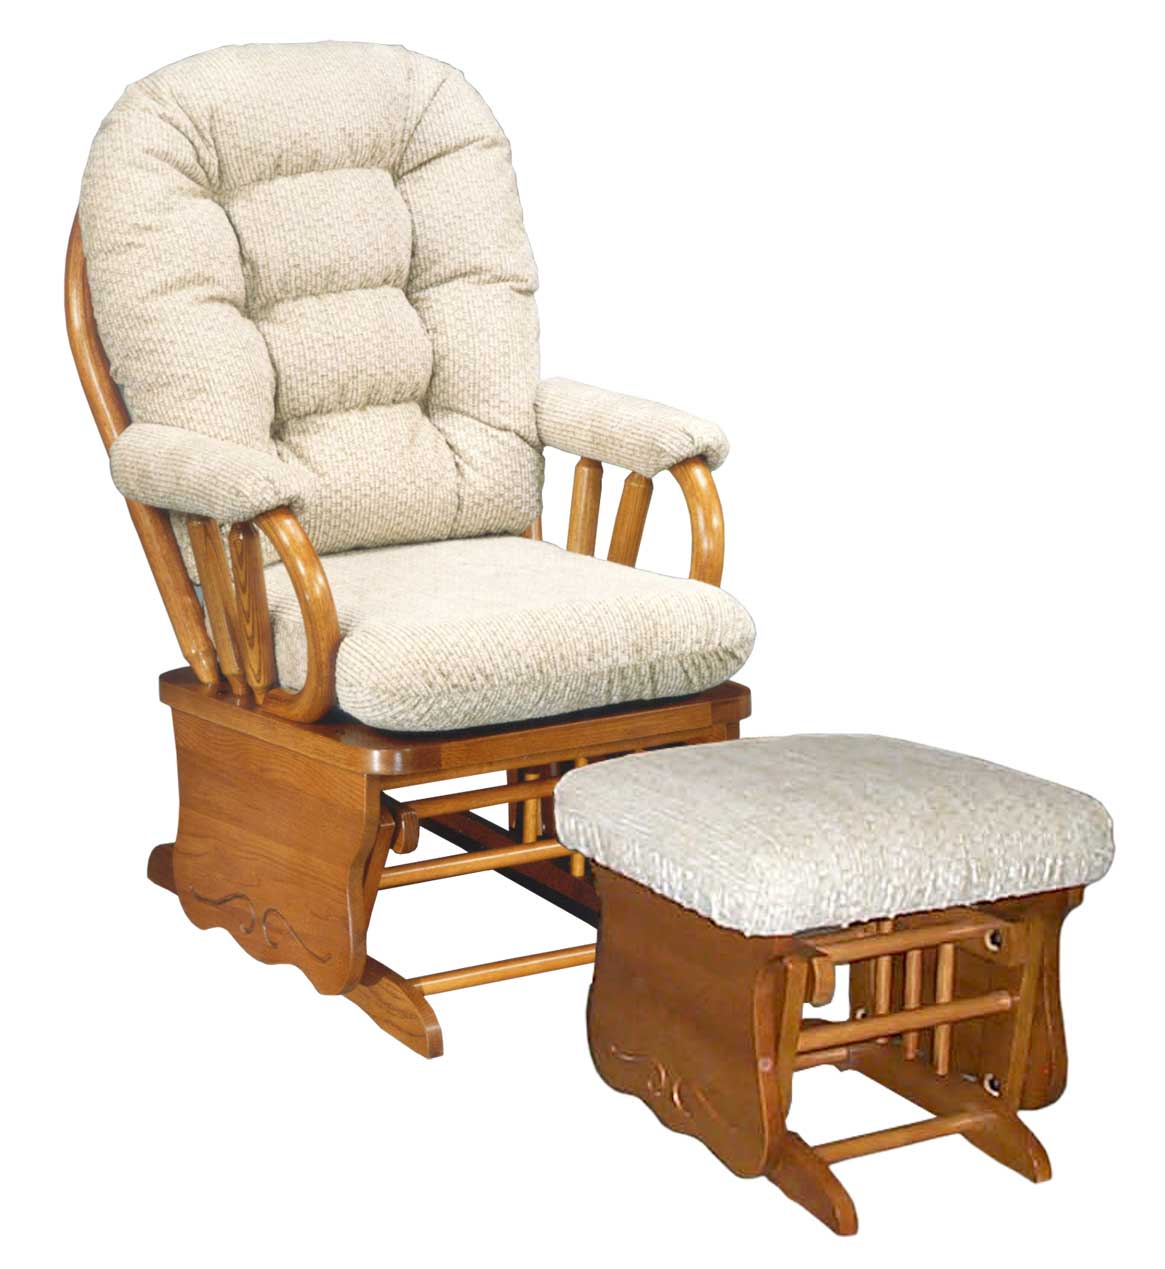 Gliders & Accent Chairs - Jasen's Fine Furniture- Since 1951